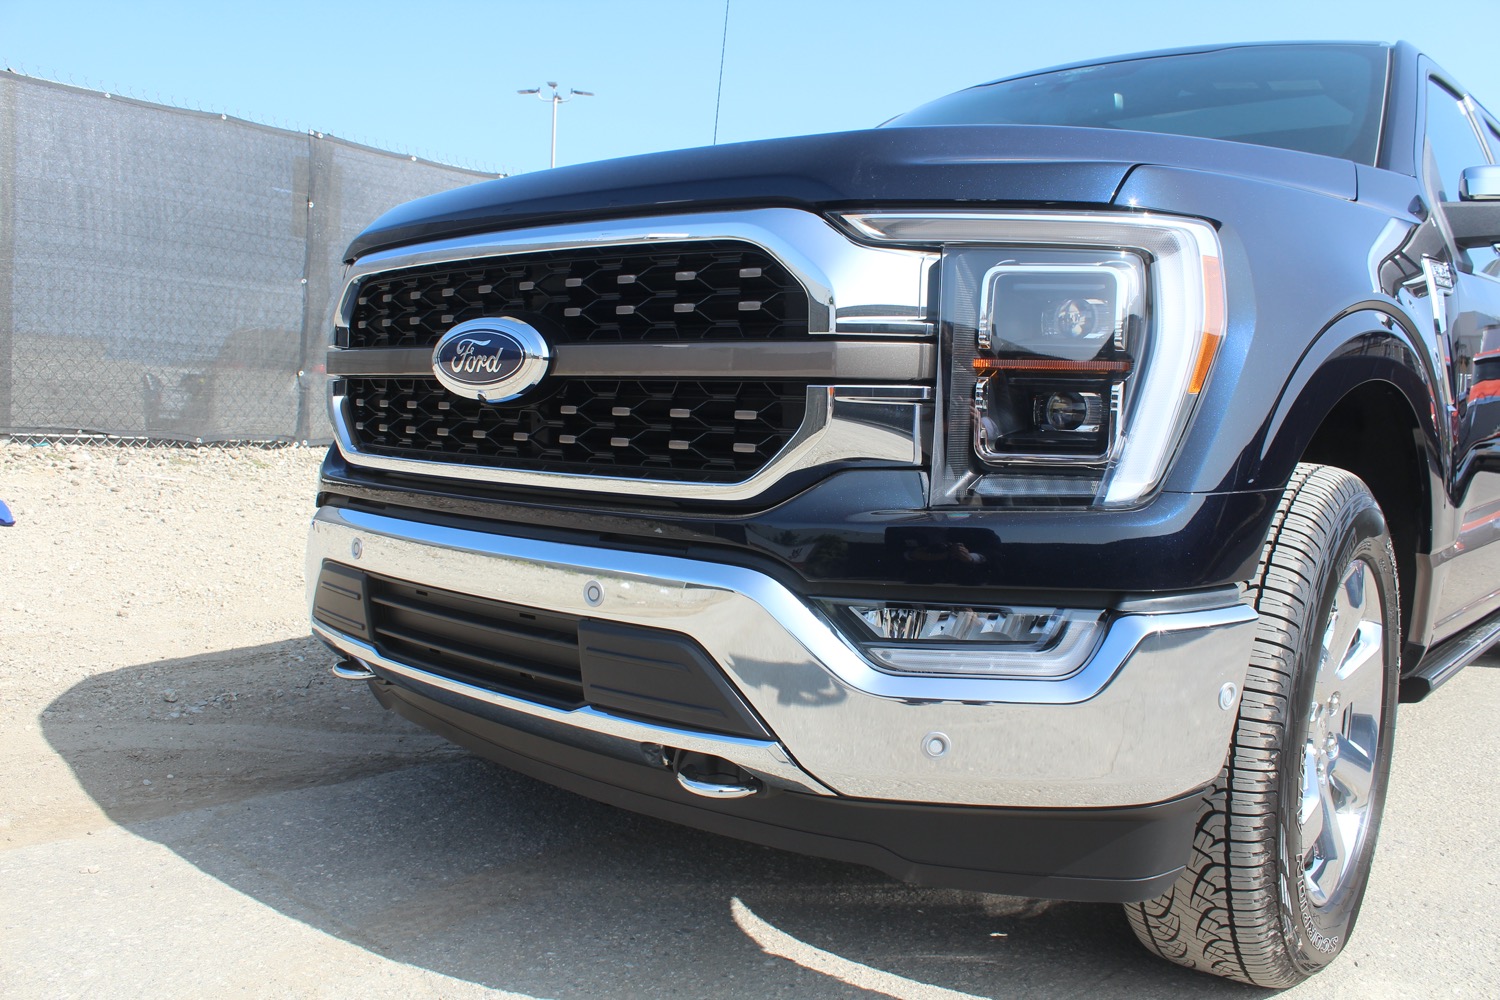 Ford Bronco Antimatter Blue real life look - on 2021 F-150 Antimatter Blue 2021 F-150 King Ranch Chrome 27